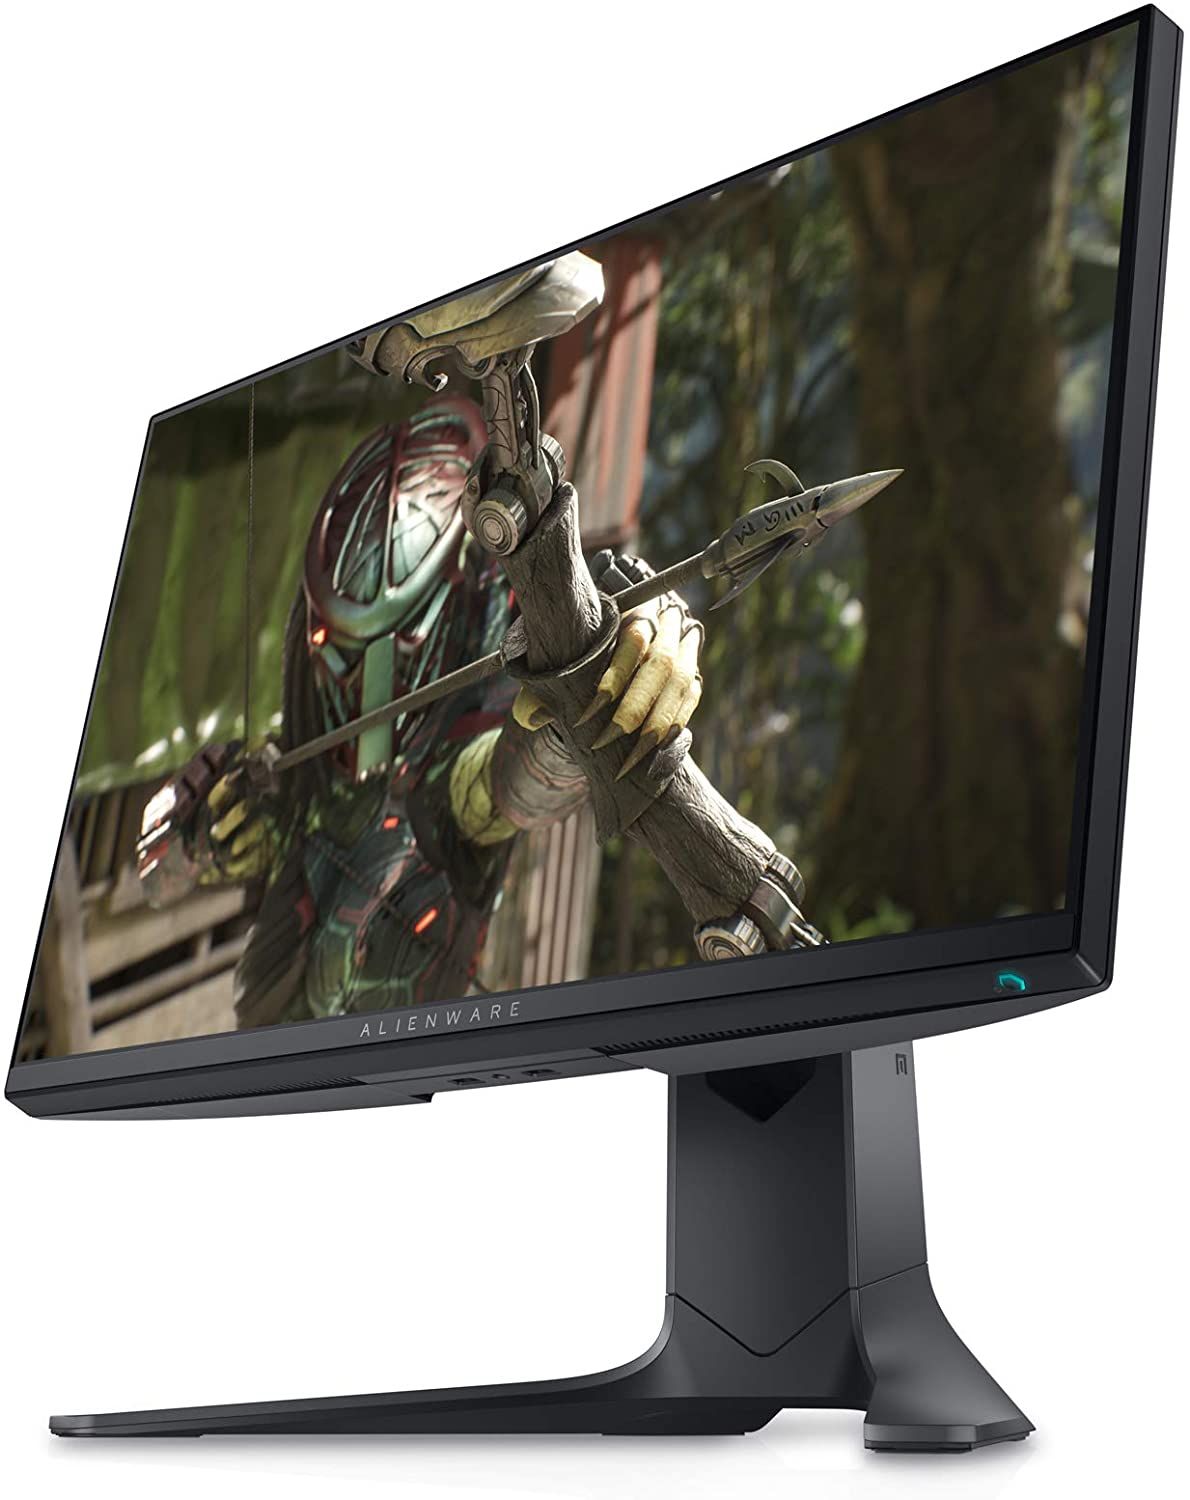 Alienware AW2521HF product image of a black monitor with a character in a mask aiming a bow and arrow on the display.